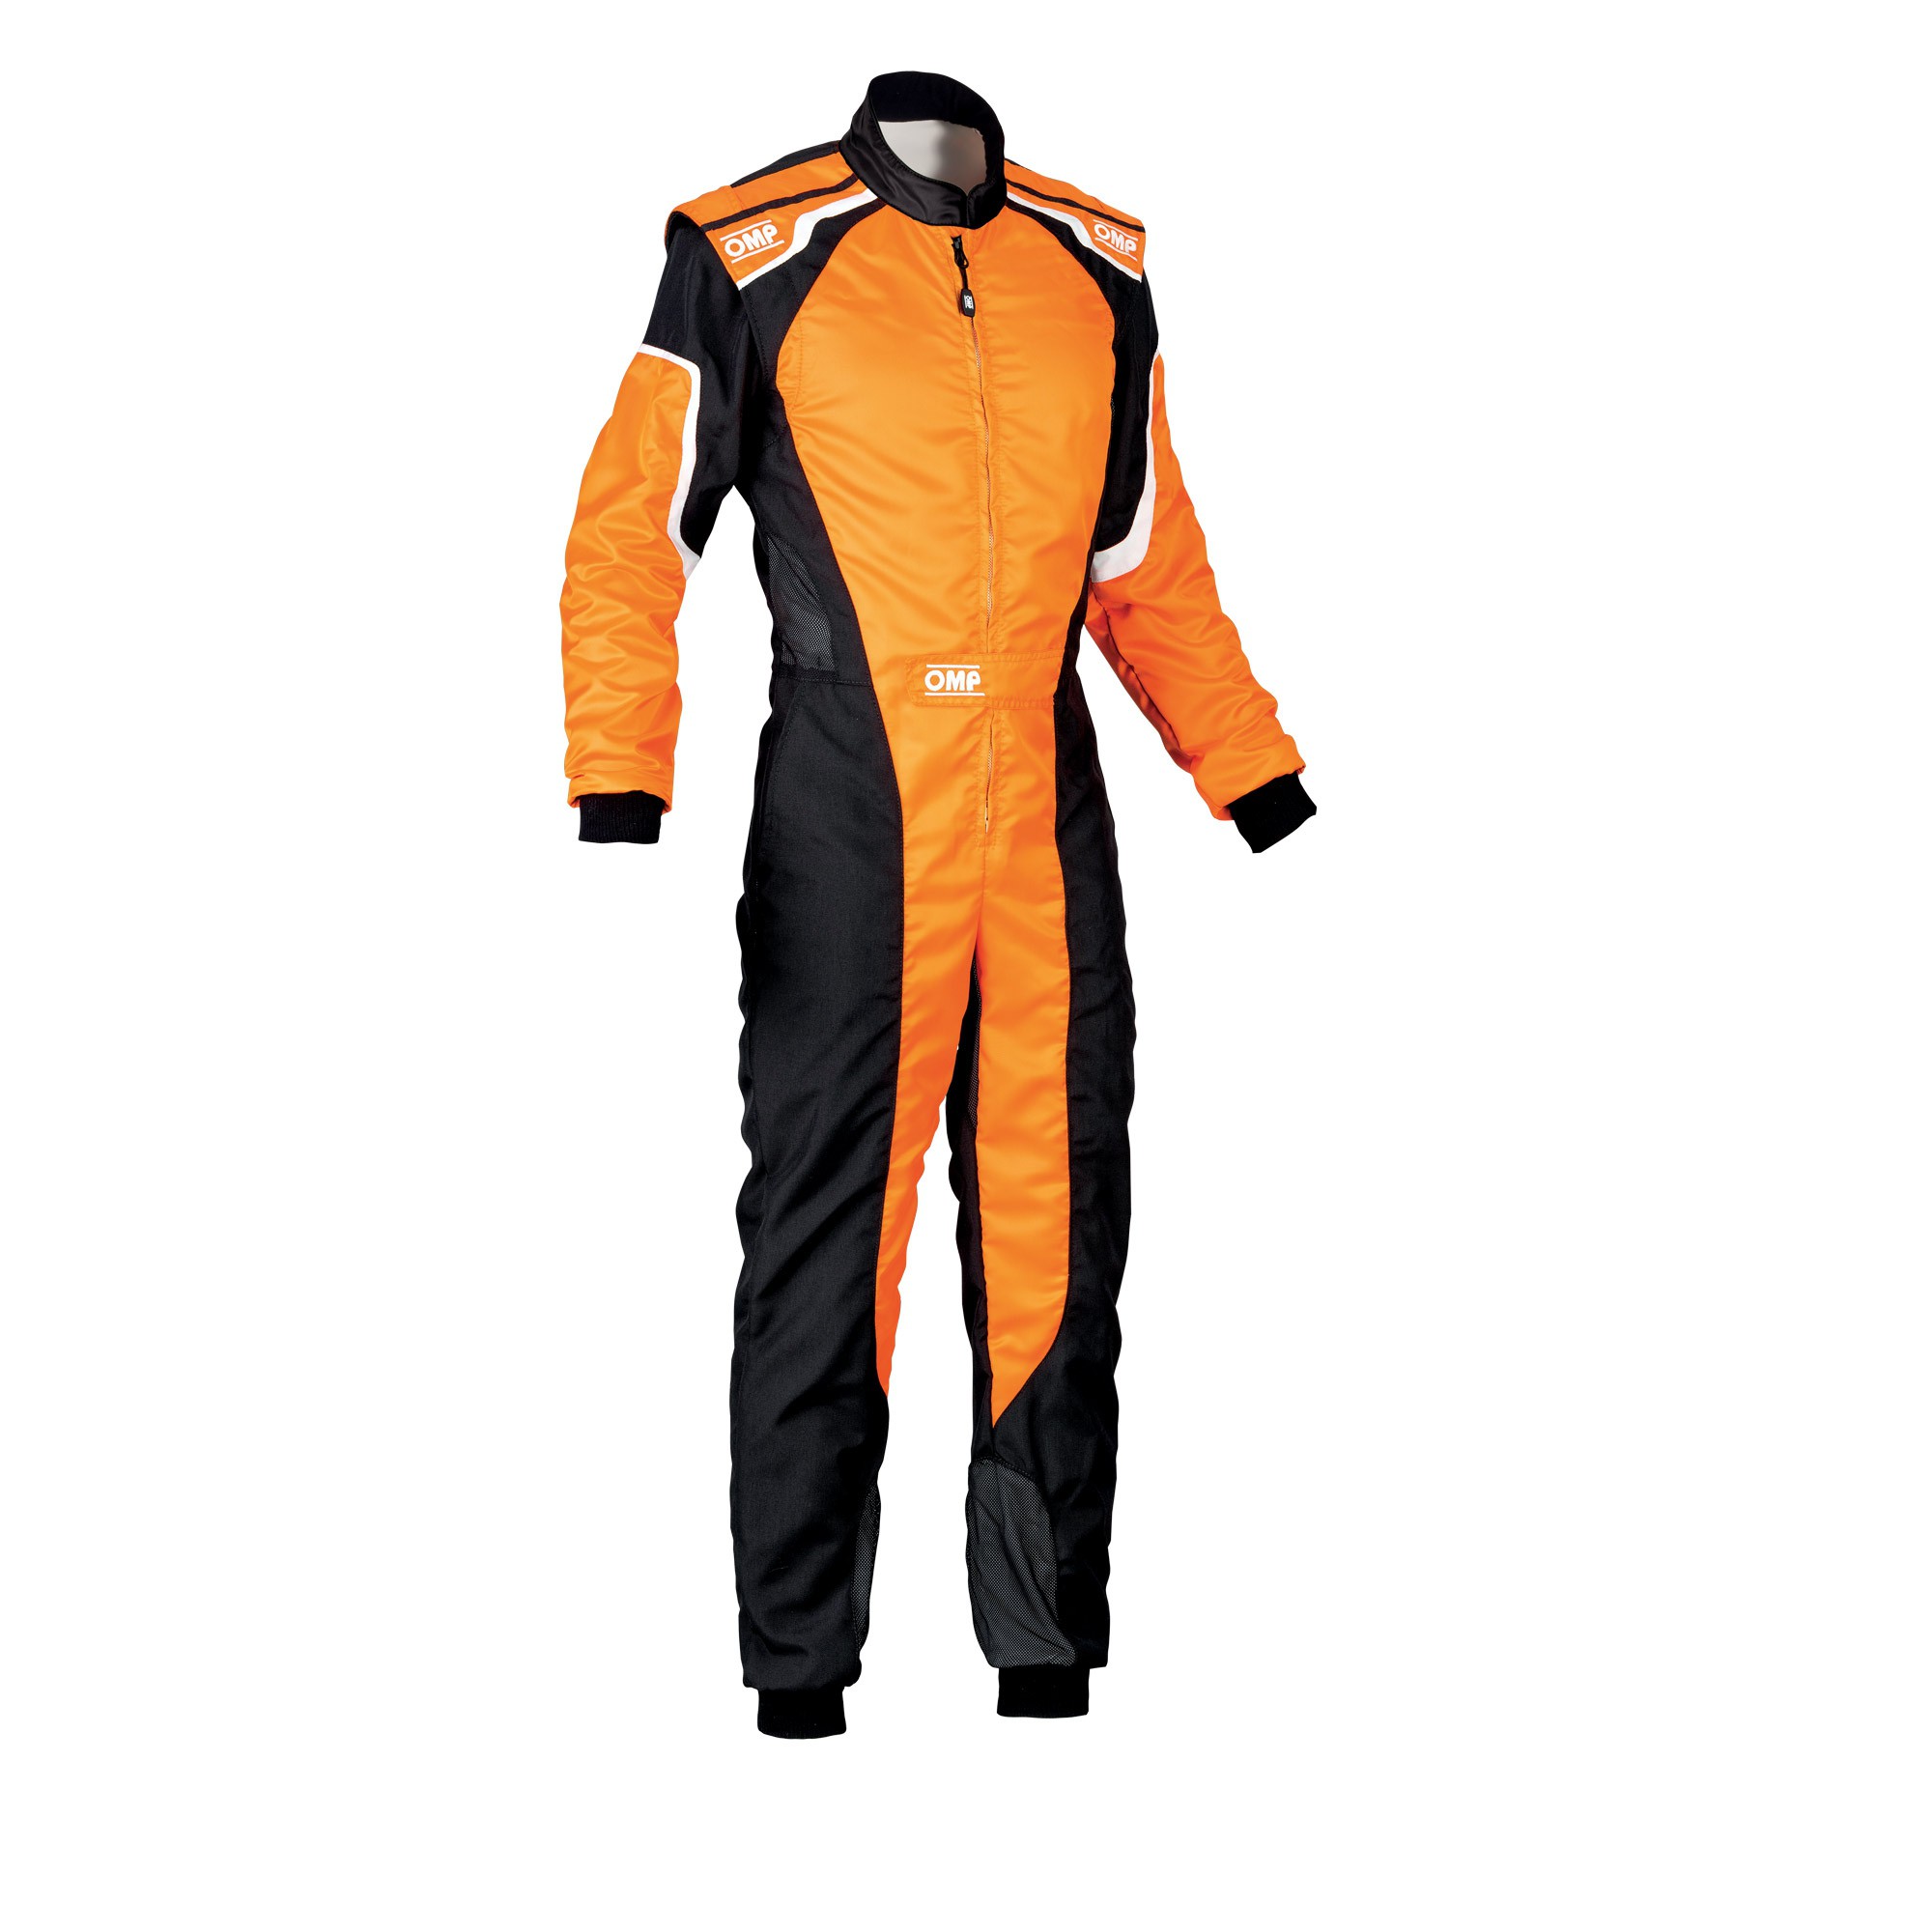 Adult Karting Race Rally suits overall Poly cotton One Piece Karting Suit New 